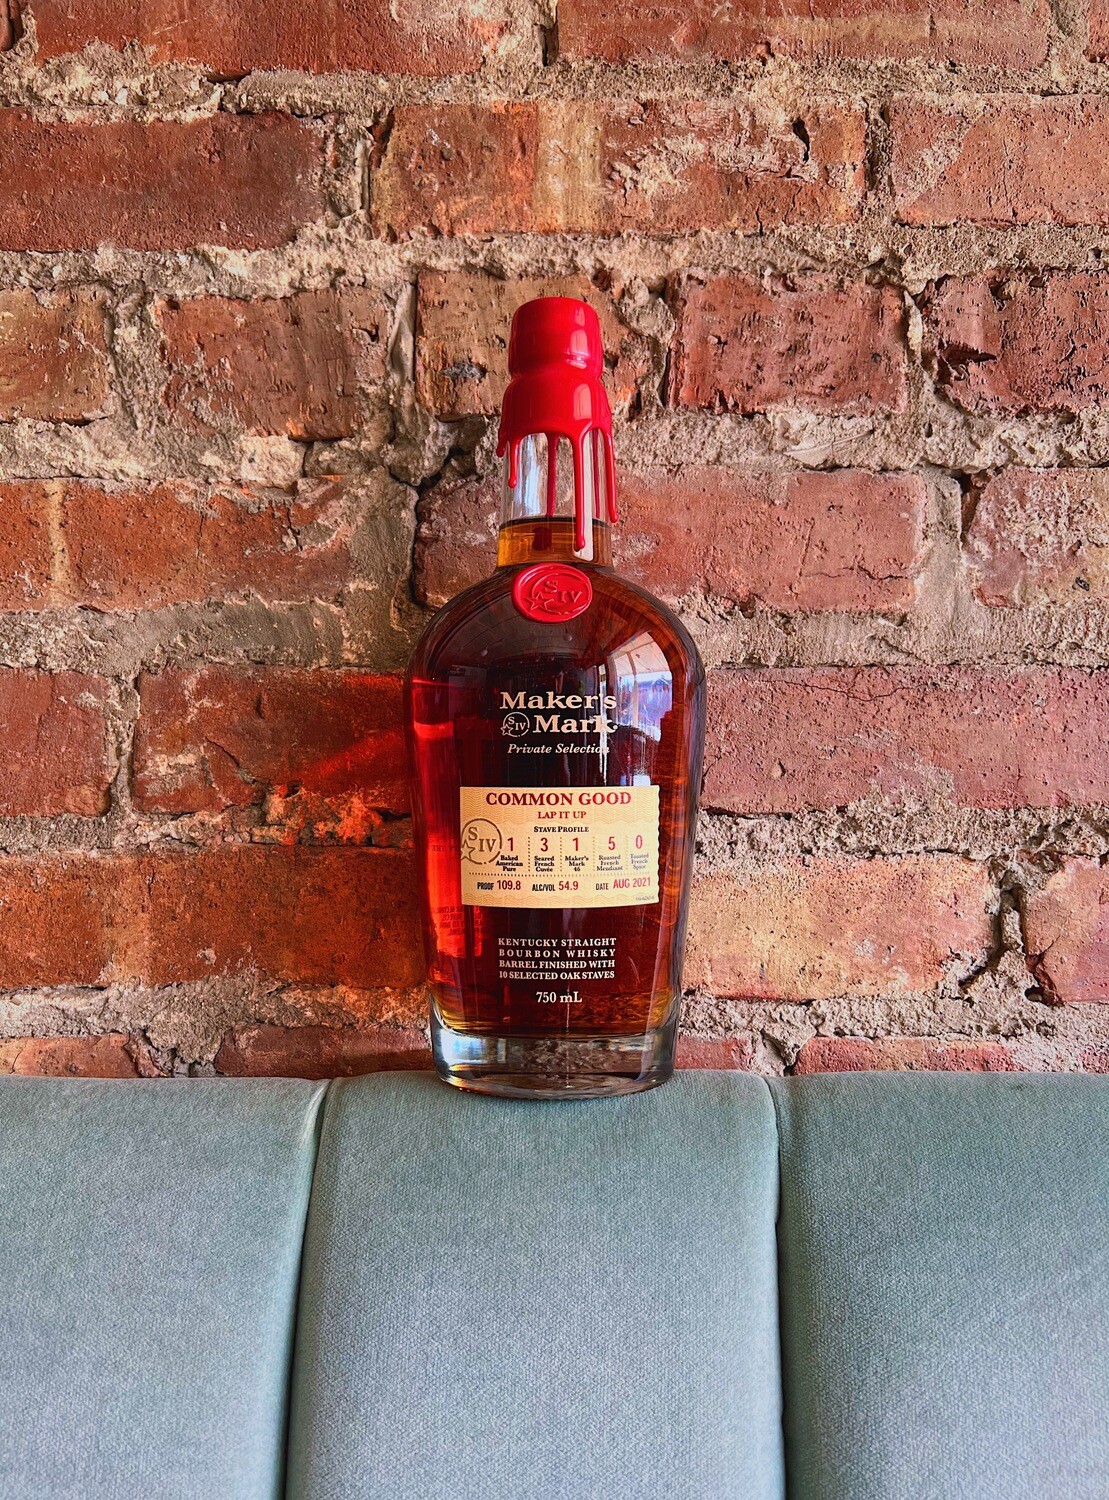 Maker's Mark "Lap It Up" Private Select